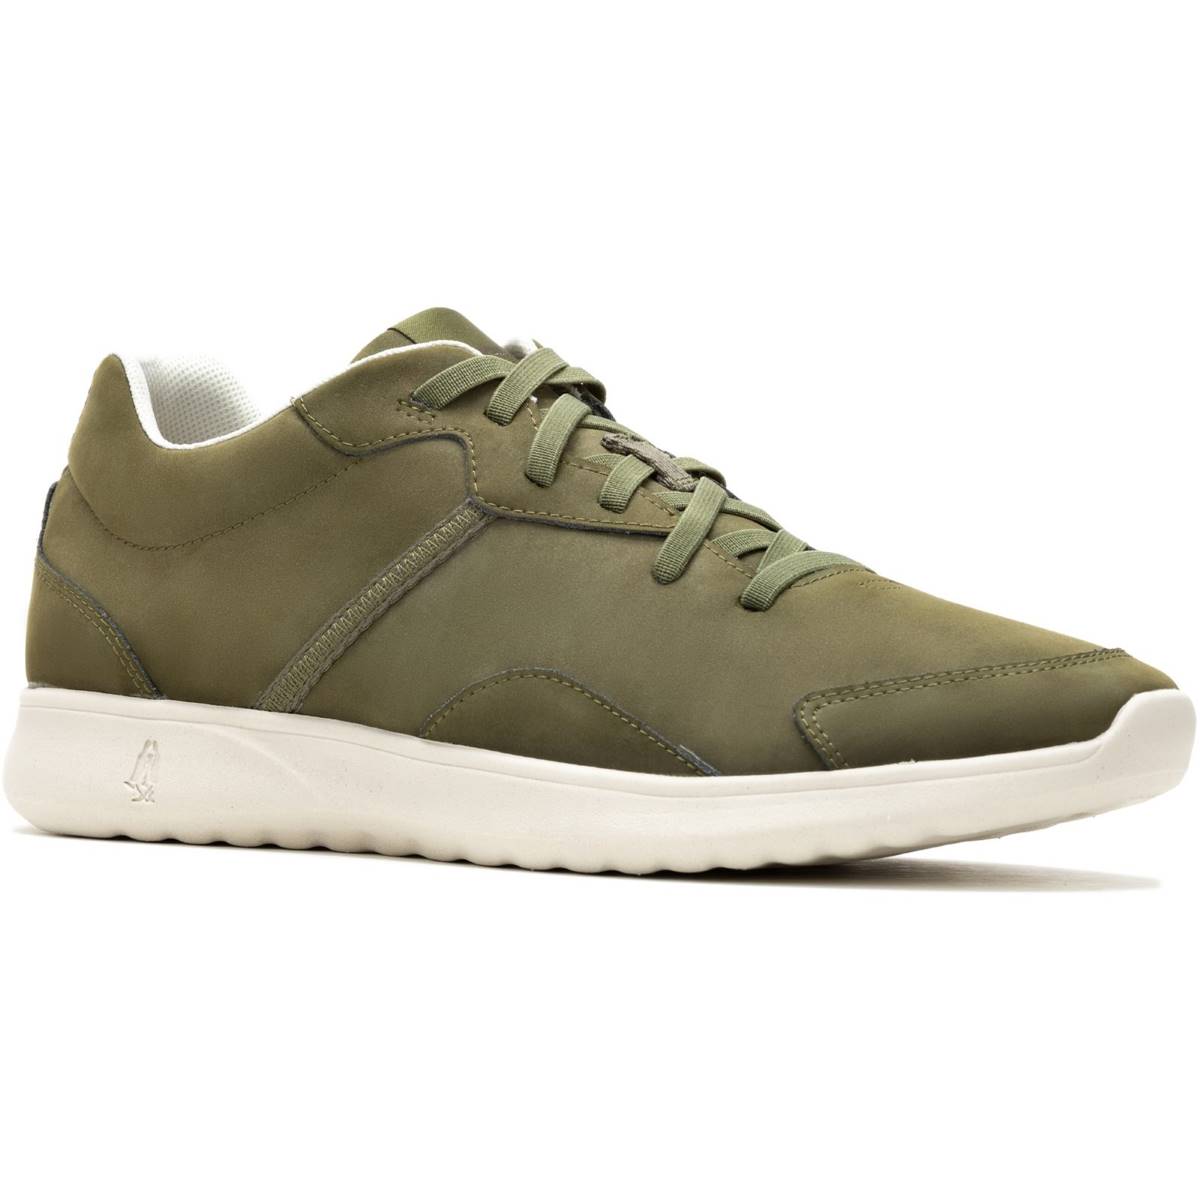 Hush Puppies The Good Trainer Olive Green Mens trainers HPM10362 in a Plain Leather and Man-made in Size 6